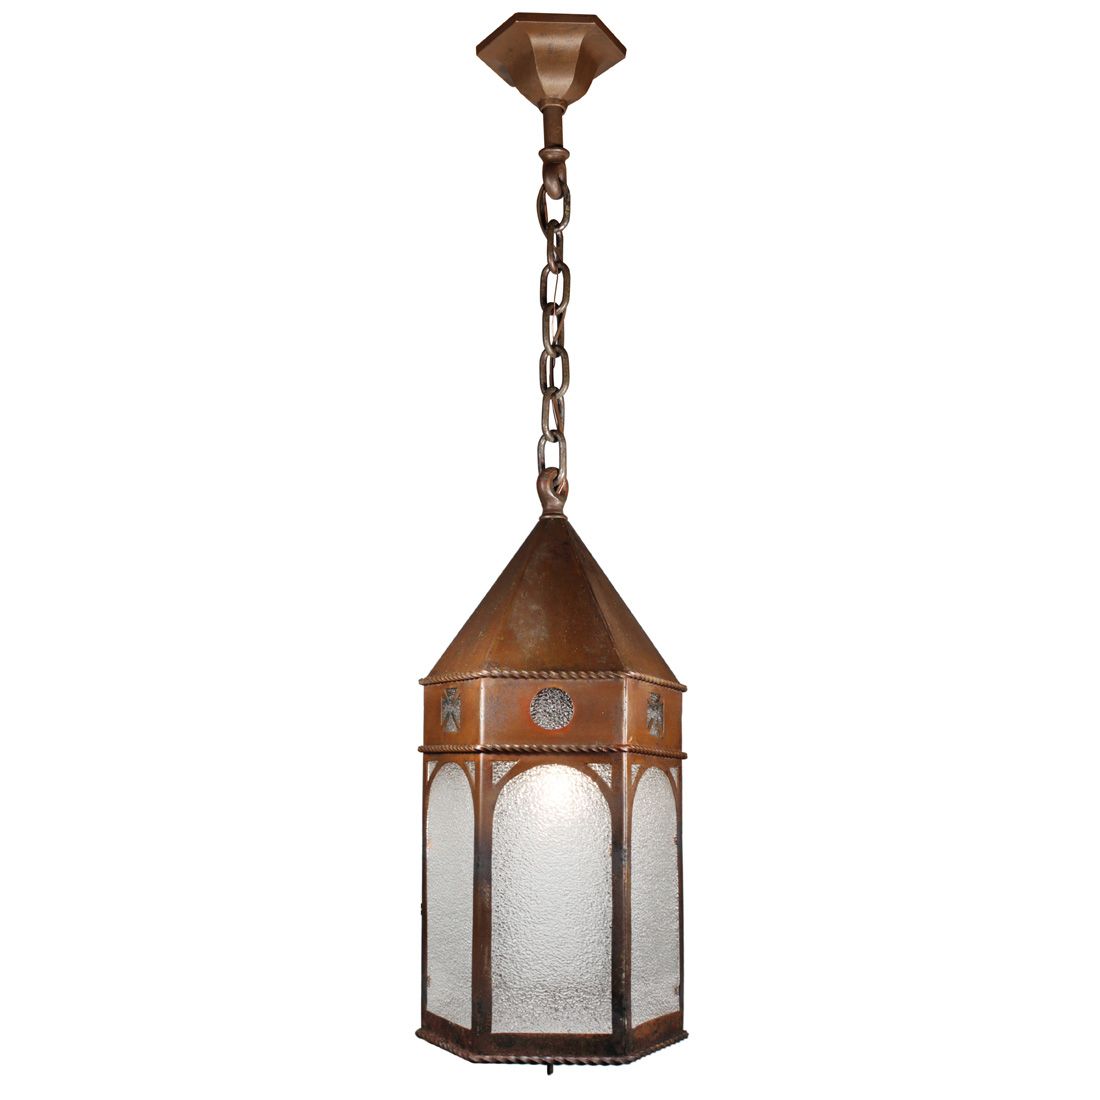 Matching Antique Bronze Lantern Pendant Lights With Granite Glass – Antique  Lighting, Ceiling, Ceiling Mounted, Exterior, Lanterns, Lighting,  Pair/multiple Chandeliers, Pendant Lighting, Recent Arrivals – The  Preservation Station With Bronze Lantern Chandeliers (View 6 of 15)